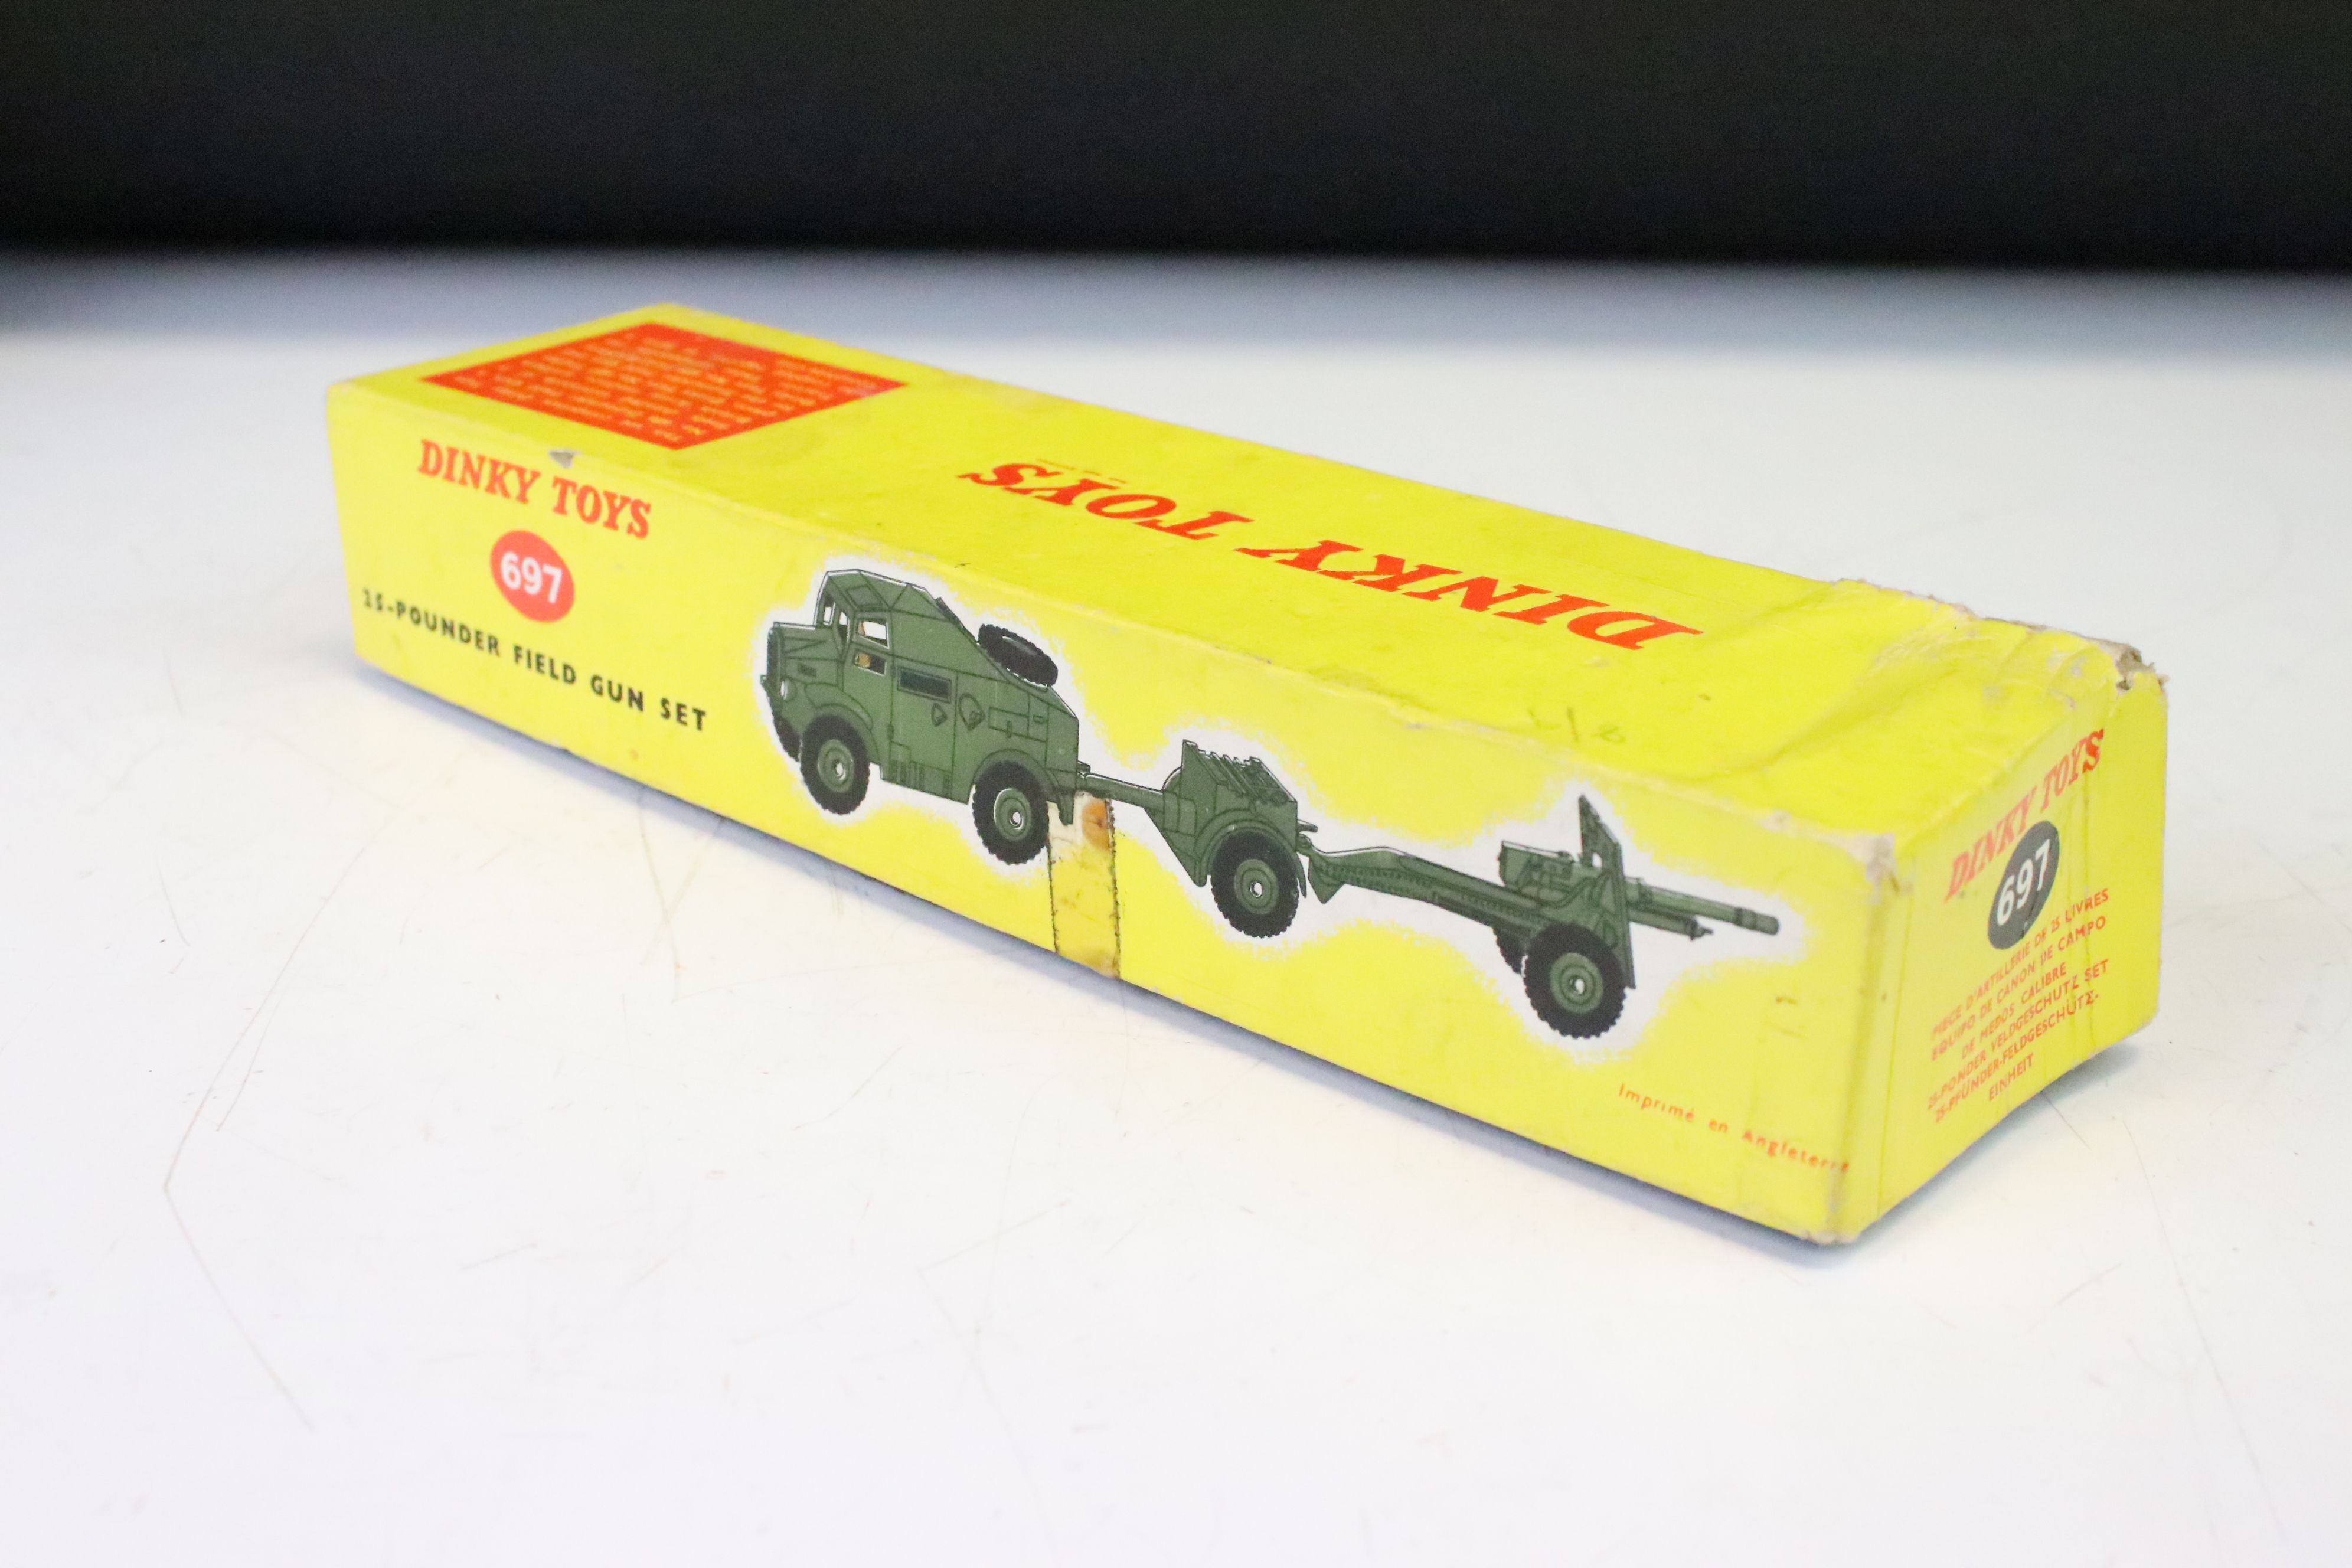 Three boxed Dinky military diecast models to include 697 25-Pounder Field Gun Set, 660 Tank - Image 5 of 13